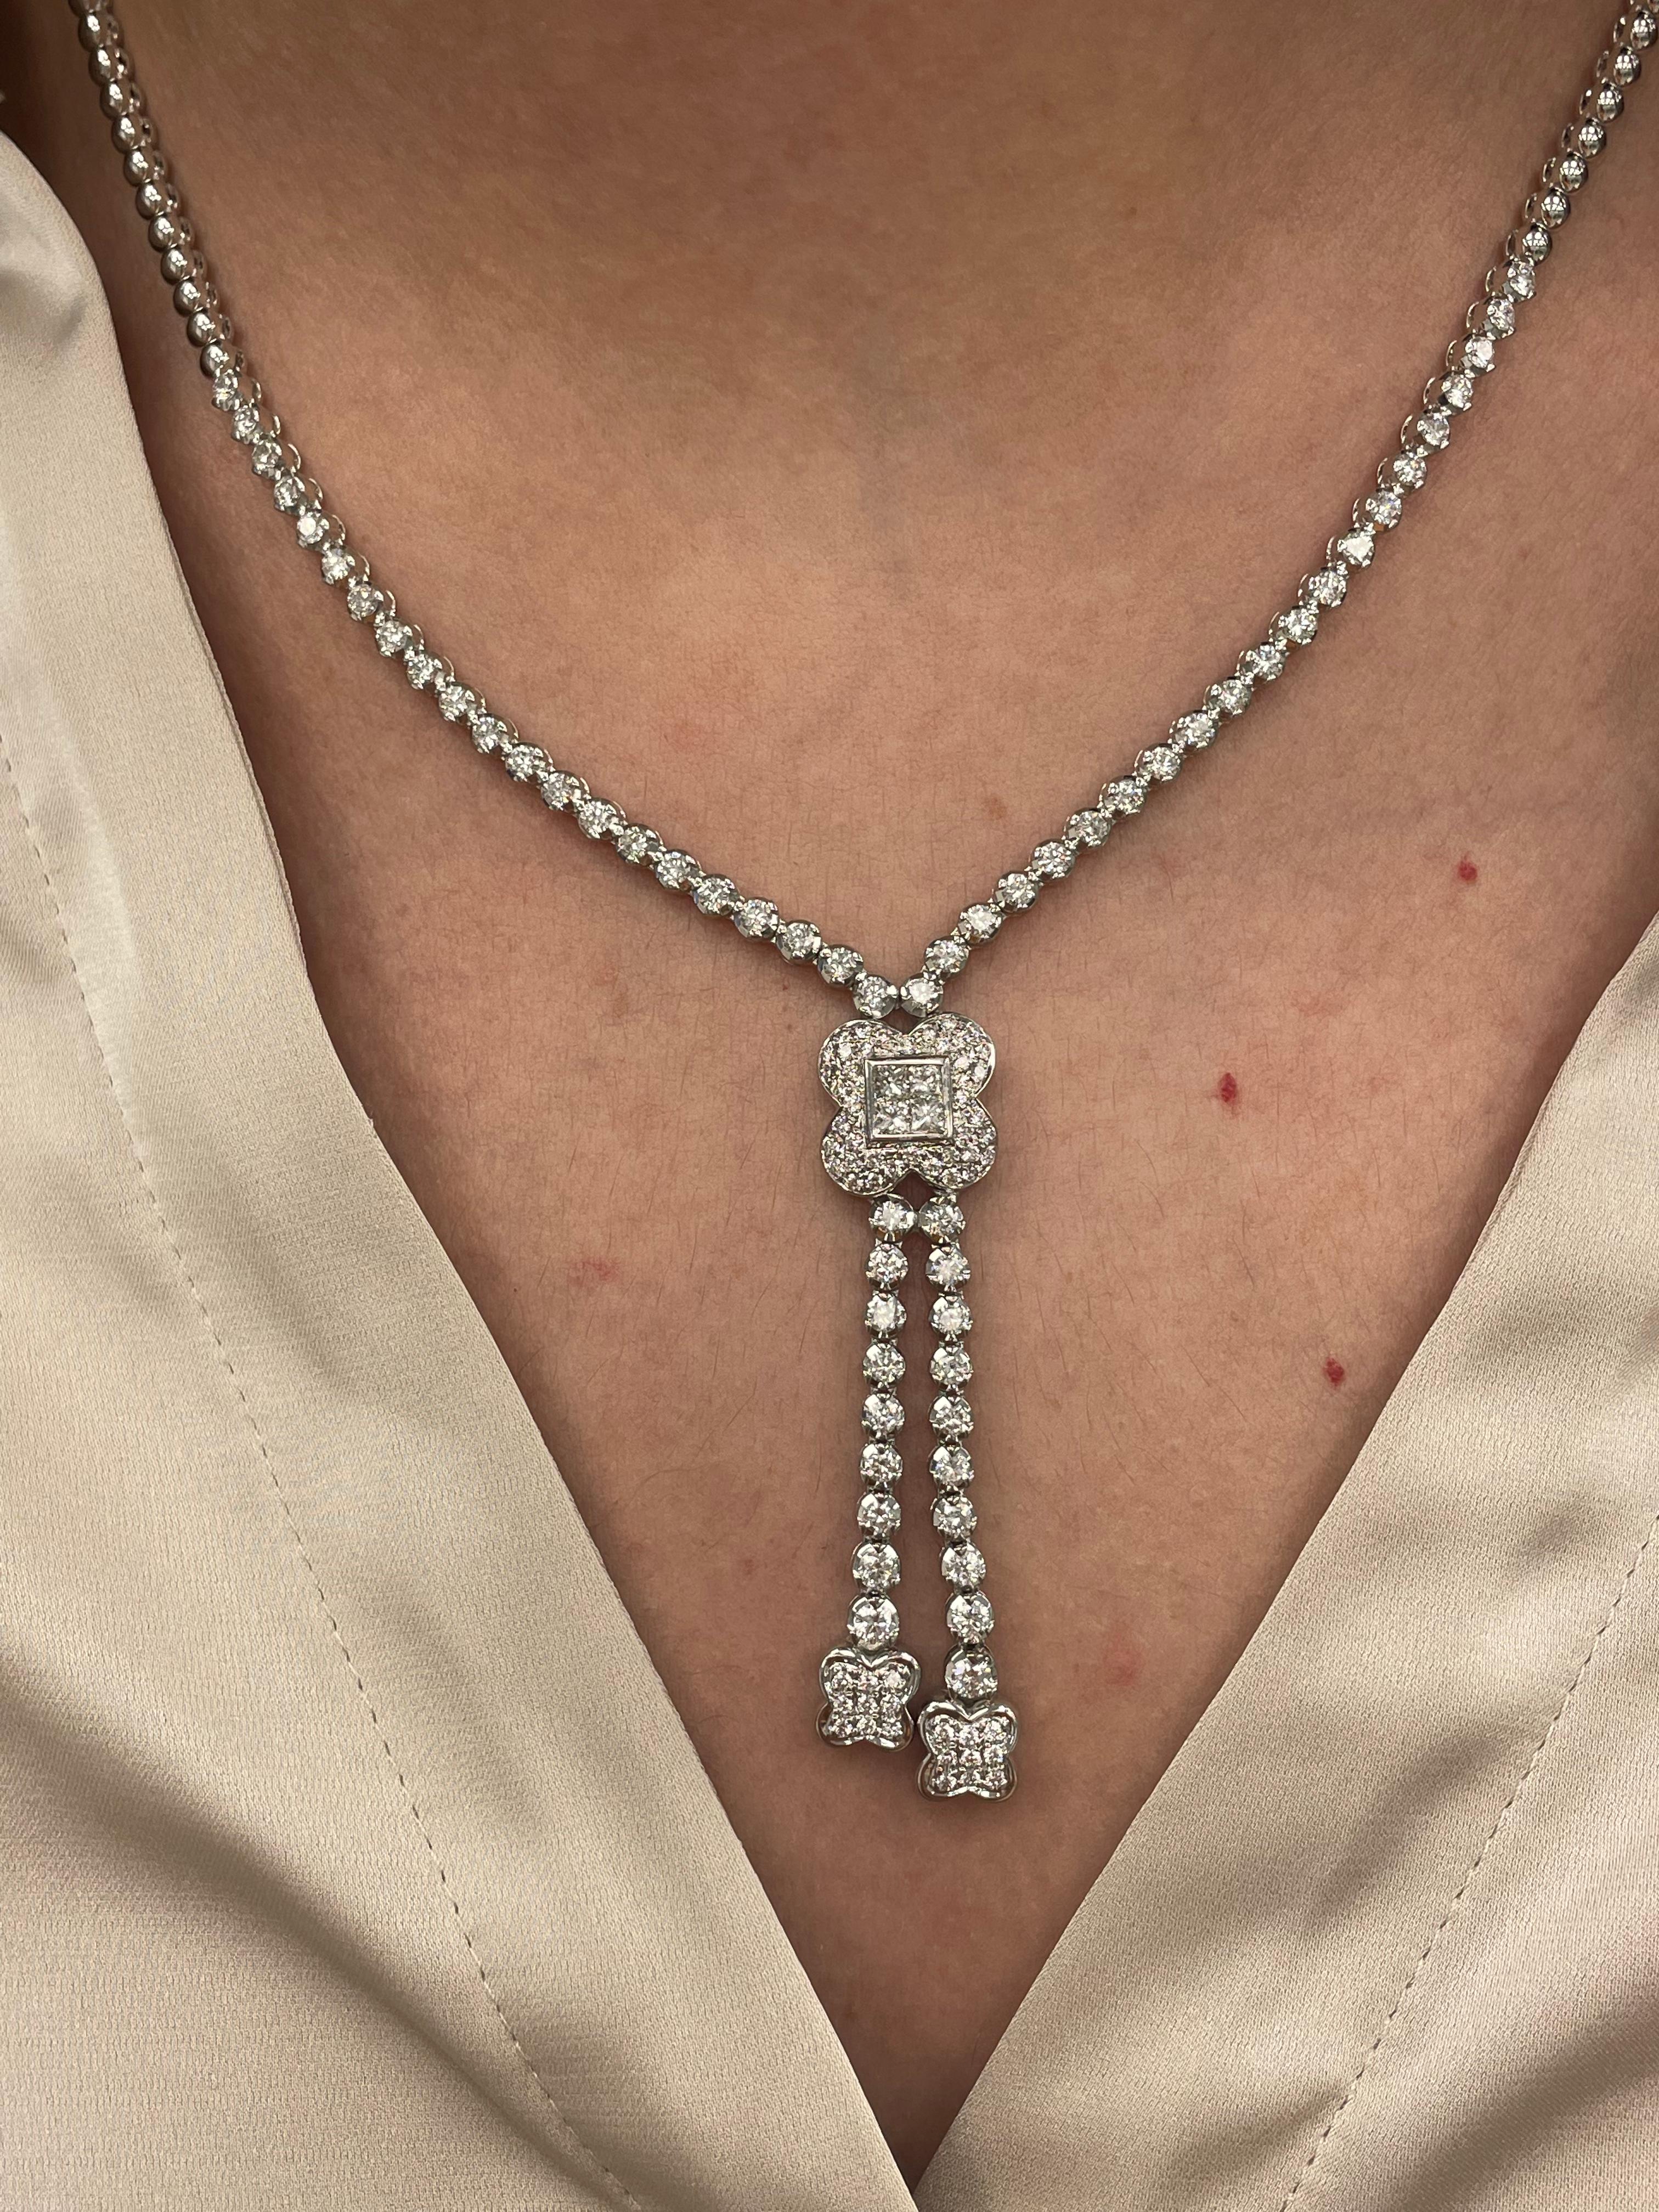 Exquisite diamond bow motif drop necklace, by Alexander Beverly Hills.
*Front half is with diamonds and the back half is nor.
61 round brilliant and 4 princess cut diamonds, 3.22 carats total. Approximately D-F color and VS clarity. Prong set in 18k